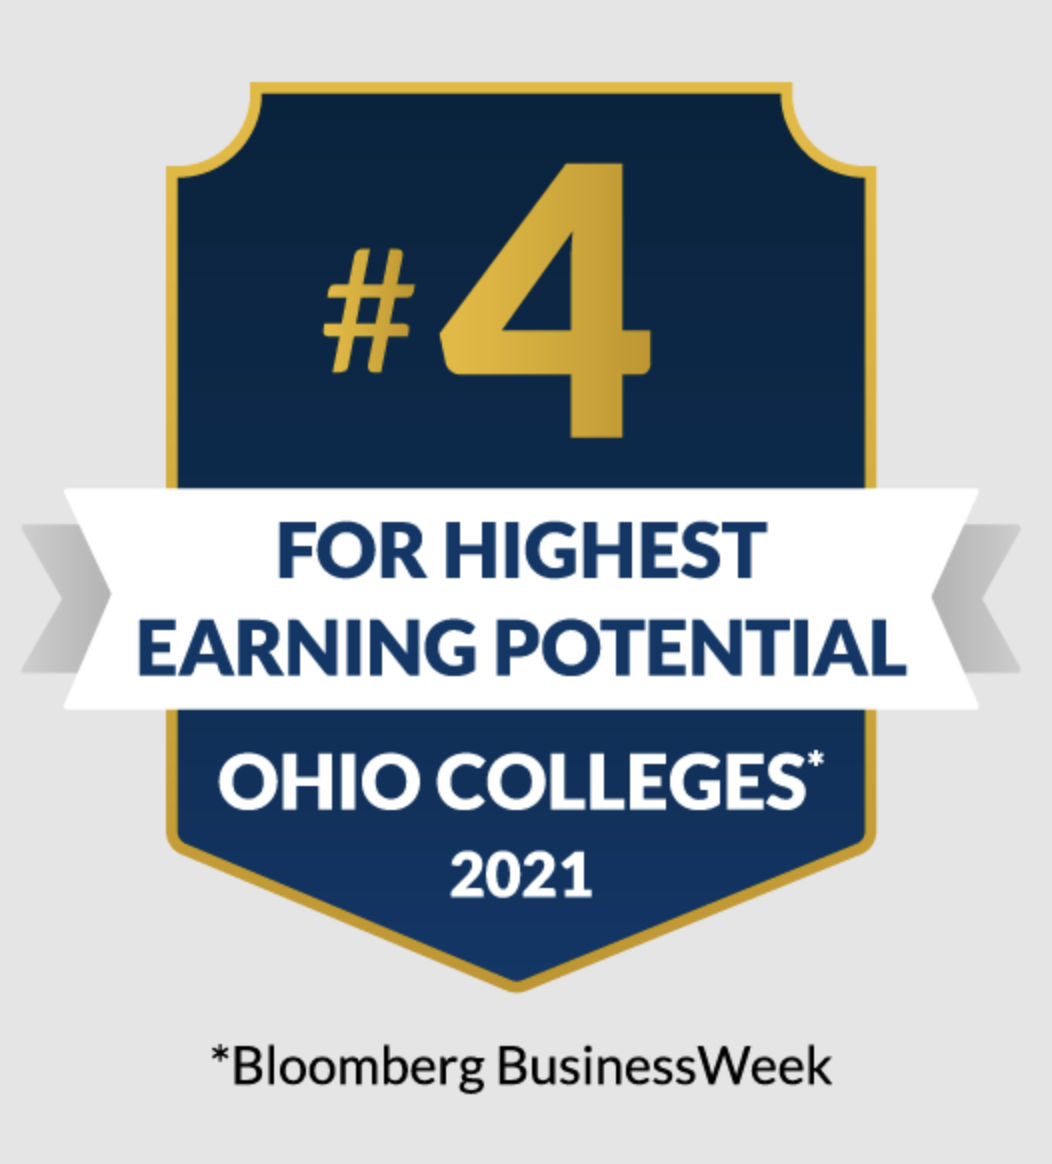 highest earning potential ohio colleges